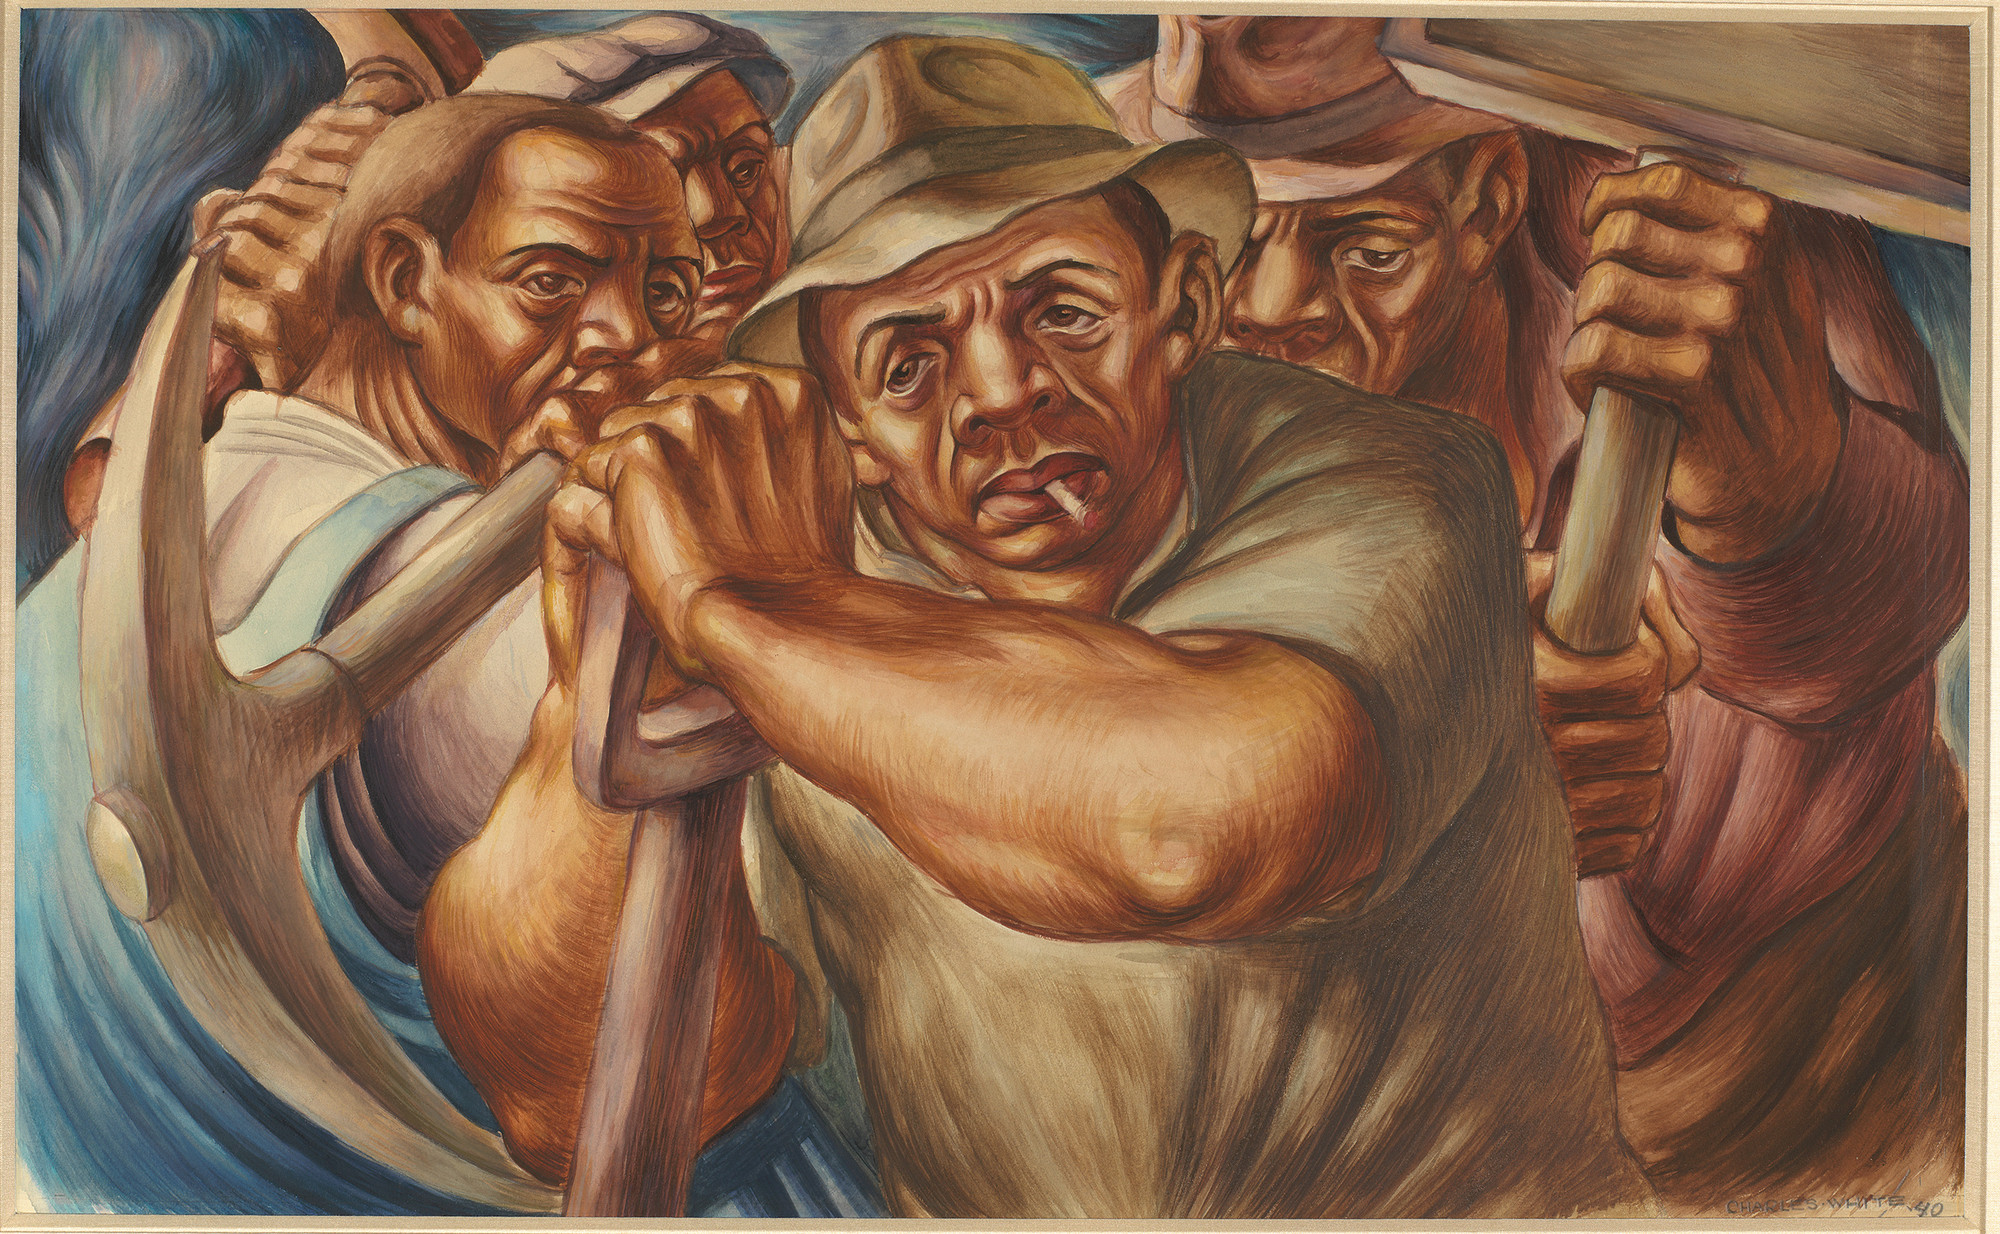 Charles White. _Untitled (Four Workers)_. 1940. Tempera on paperboard. 20 × 30" (50.8 × 76.2 cm). Private collection. © The Charles White Archives/ Photo: Jamie Stukenberg, Professional Graphics, Inc. 